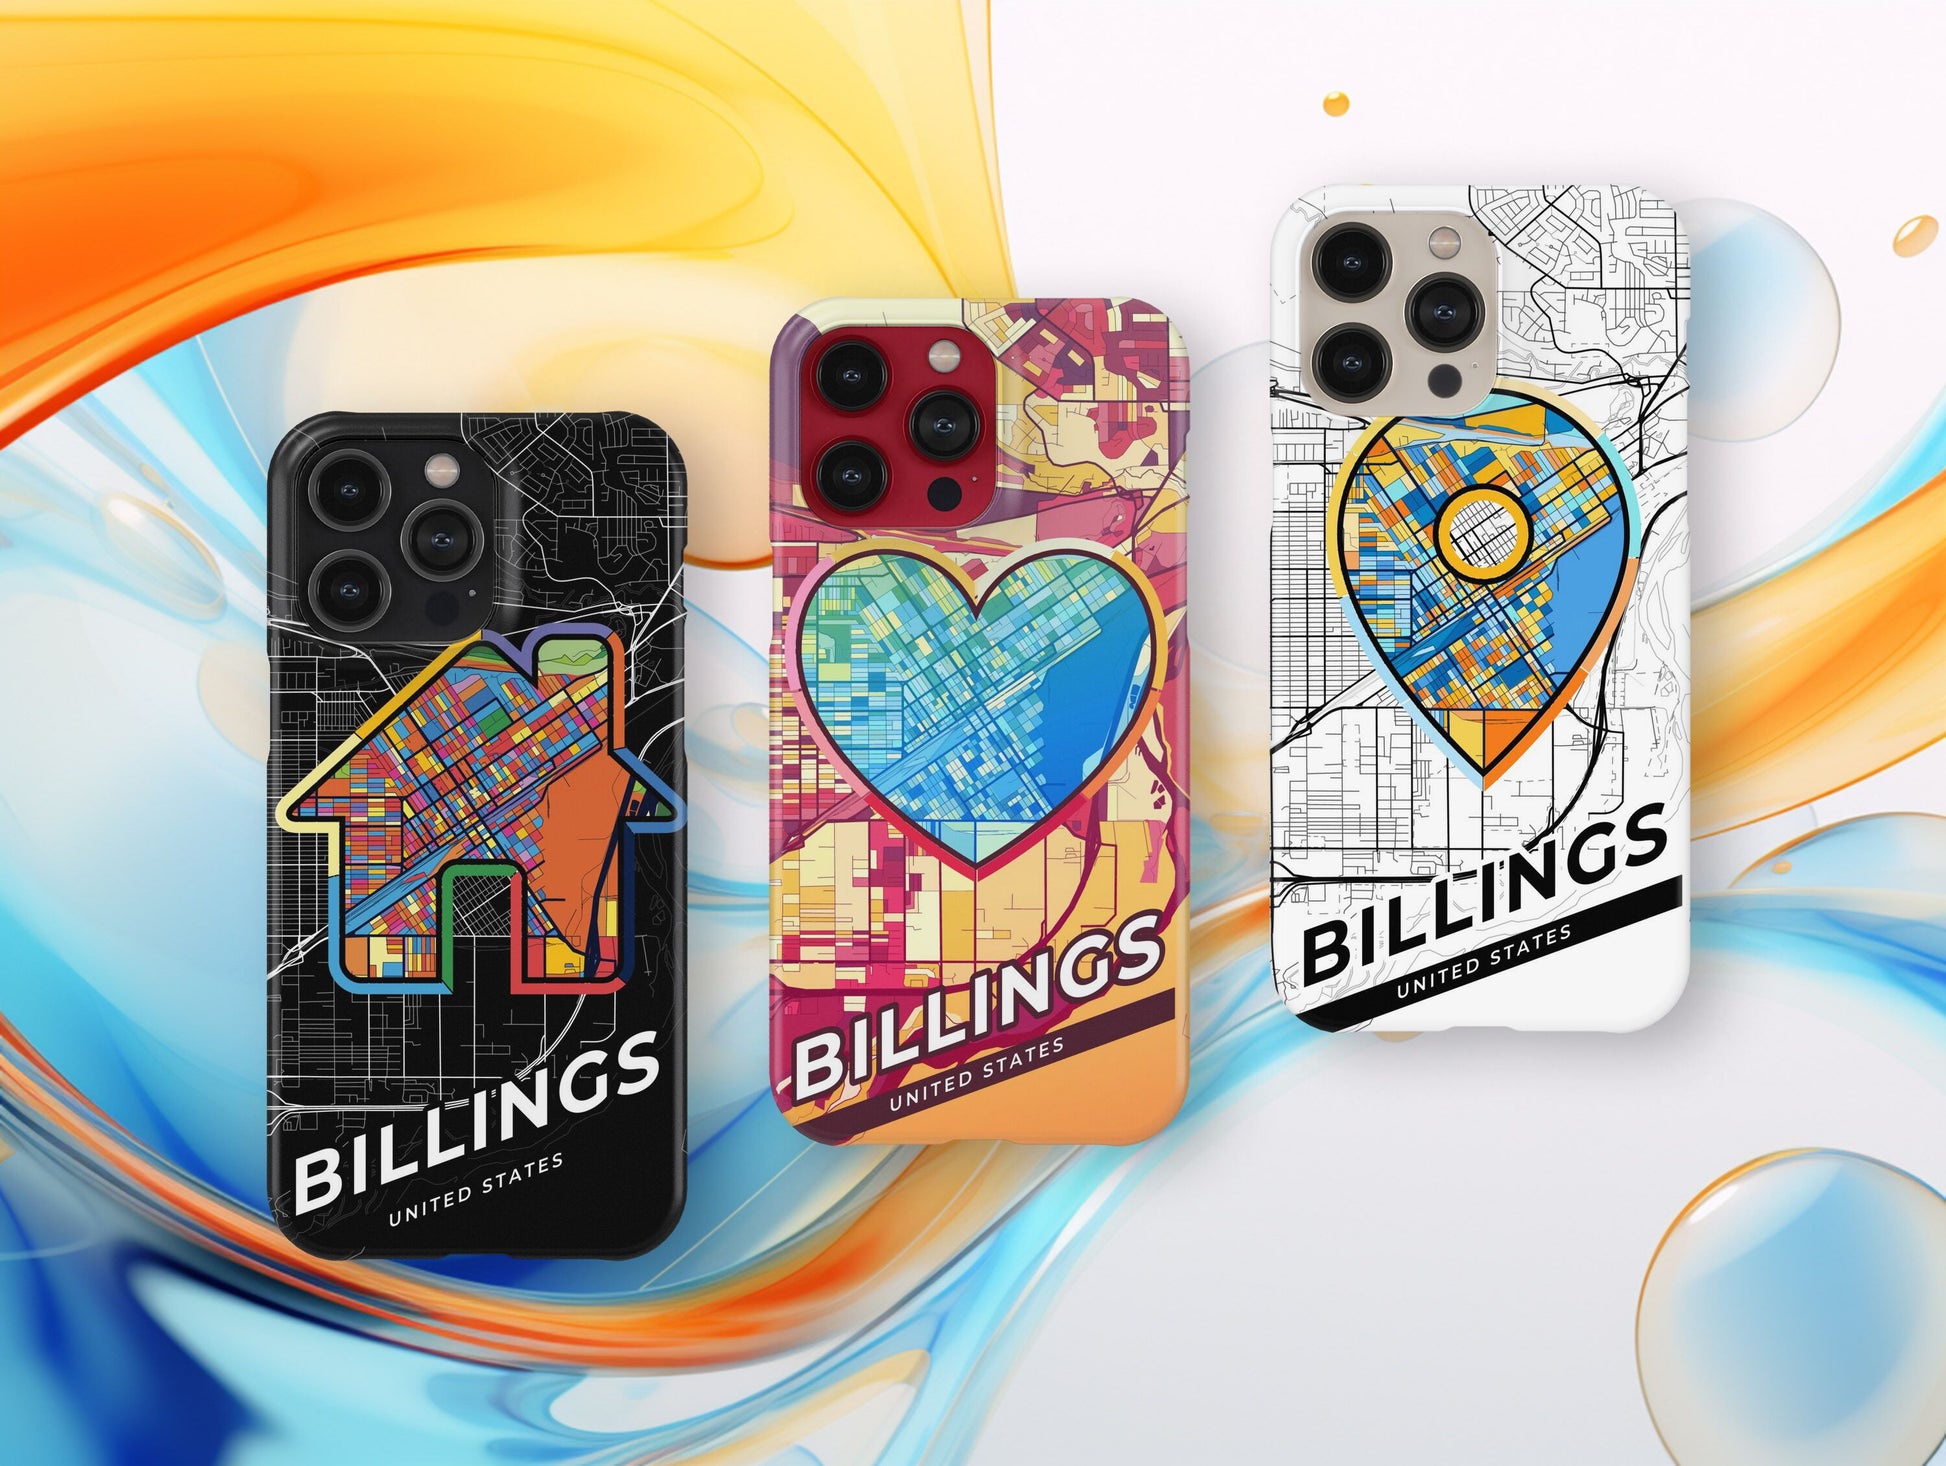 Billings Montana slim phone case with colorful icon. Birthday, wedding or housewarming gift. Couple match cases.